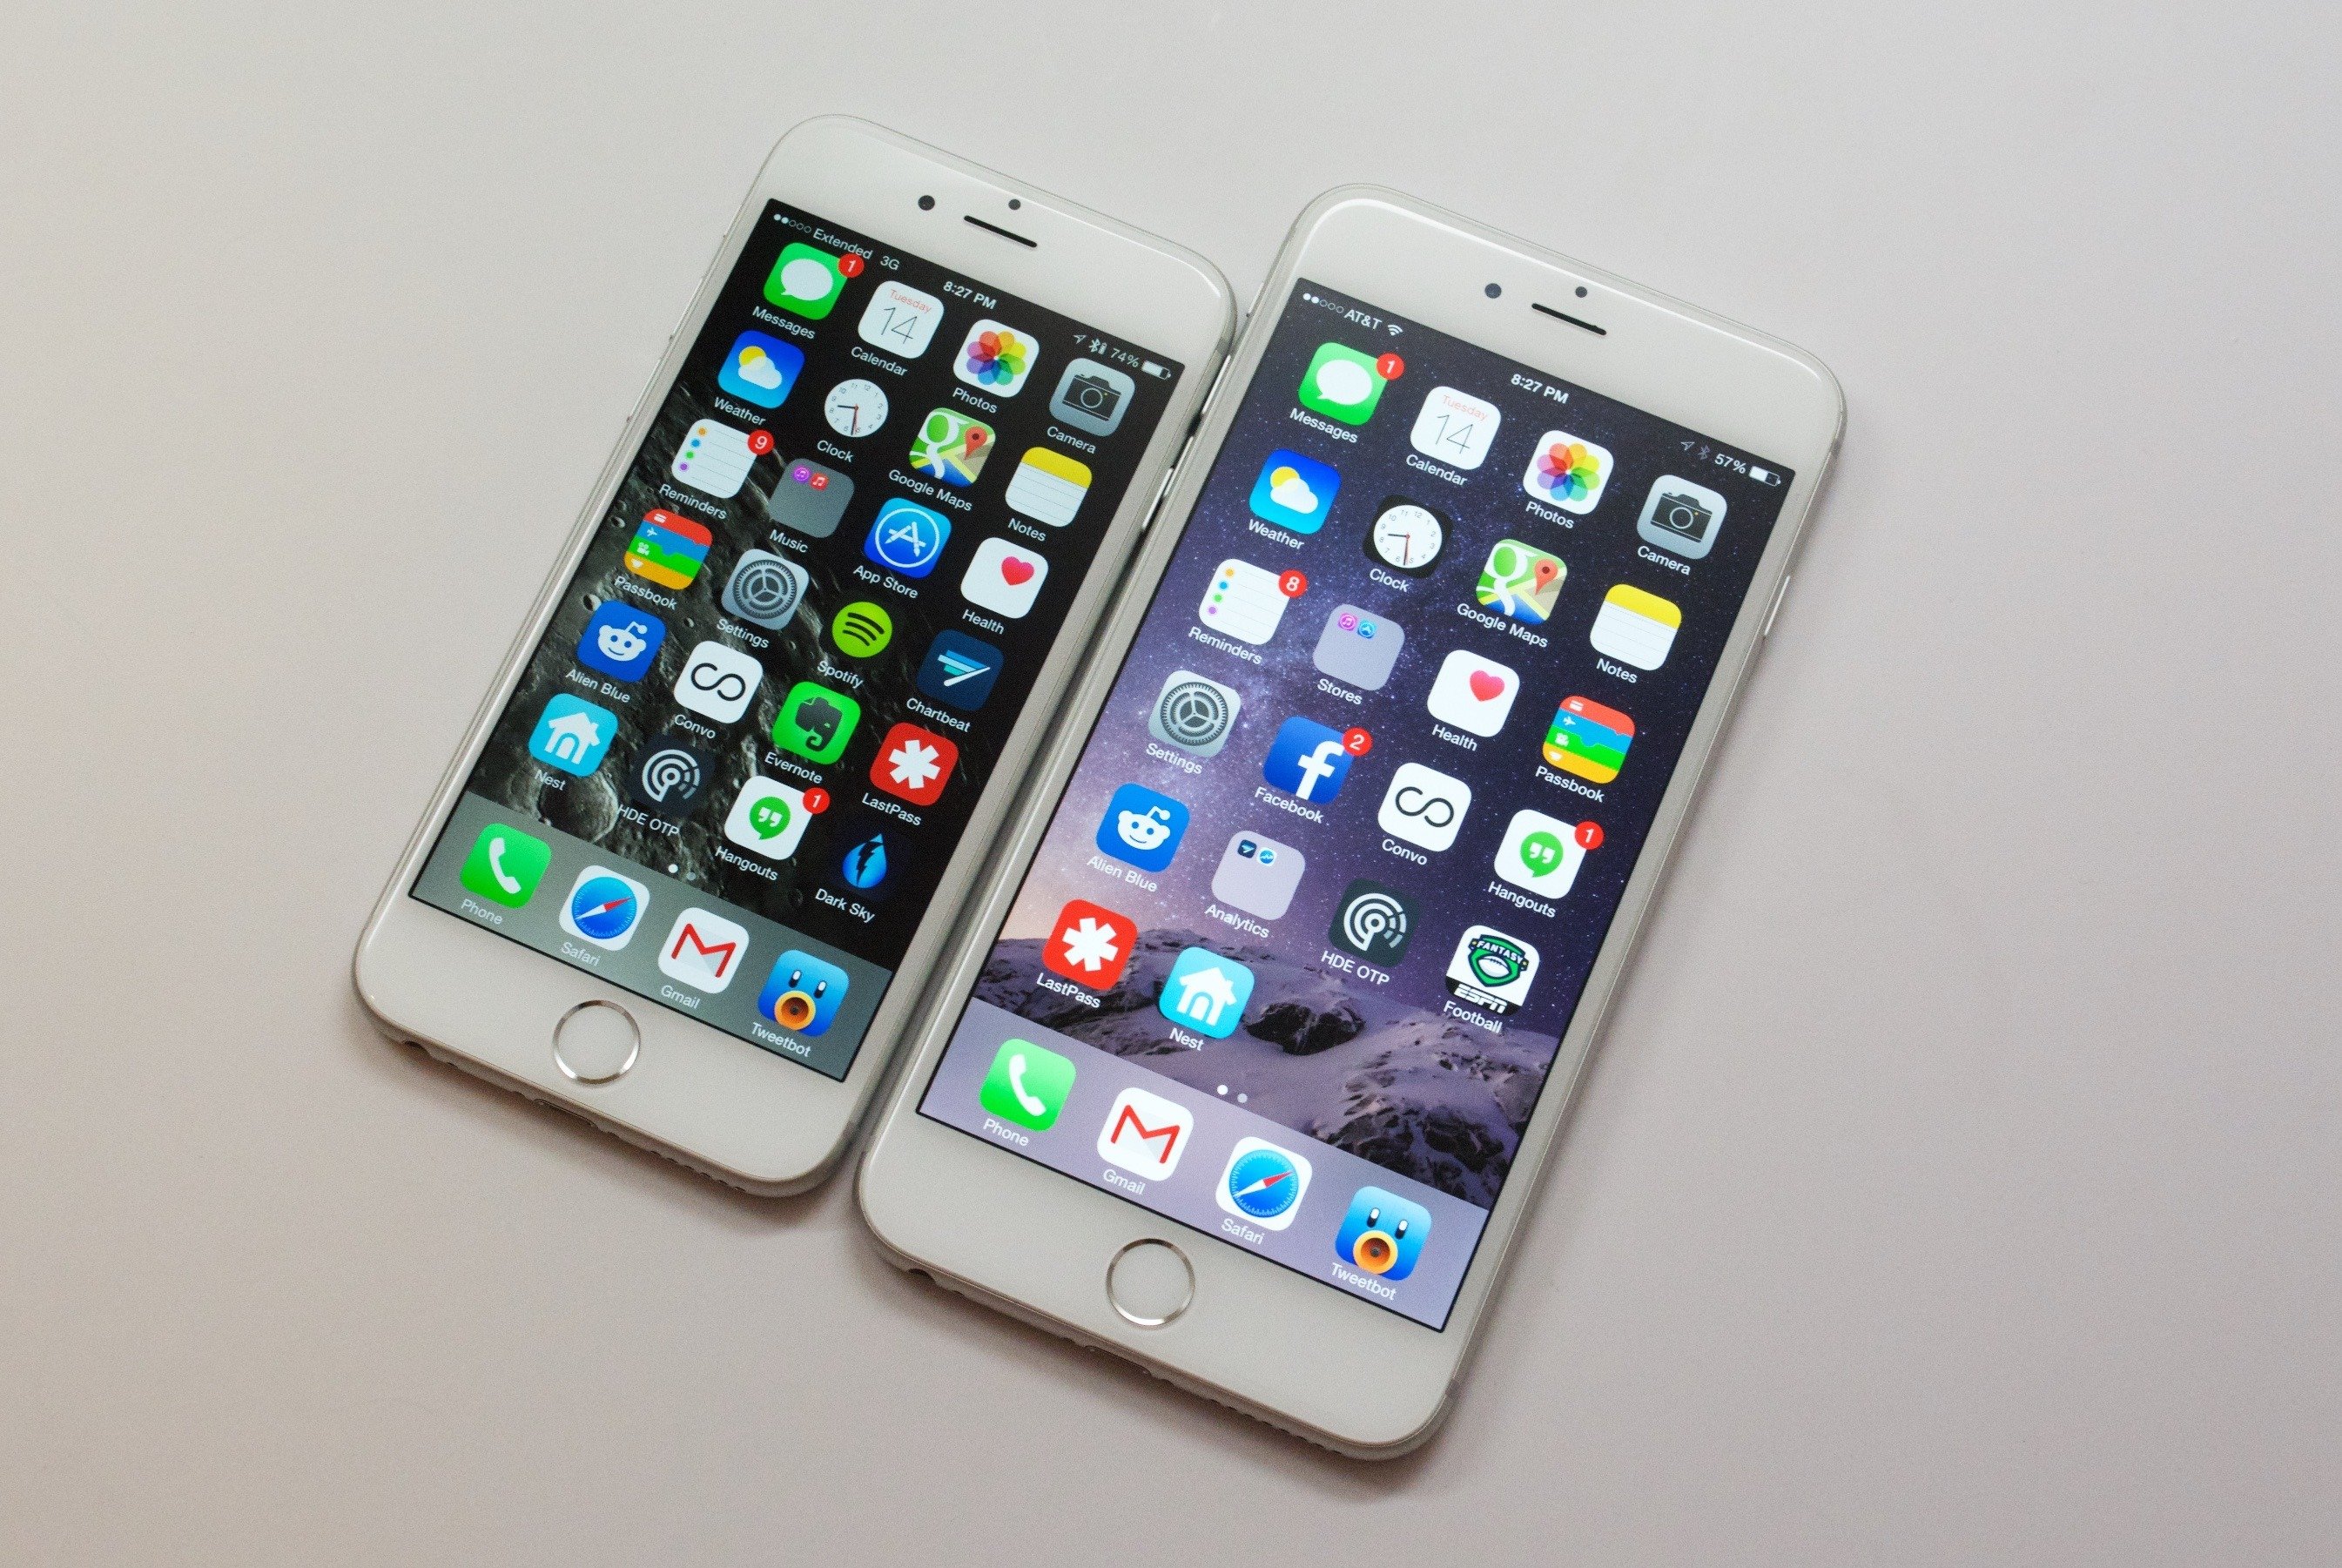 Apple iPhone 6S Plus vs Apple iPhone 6 Plus: What's the difference?